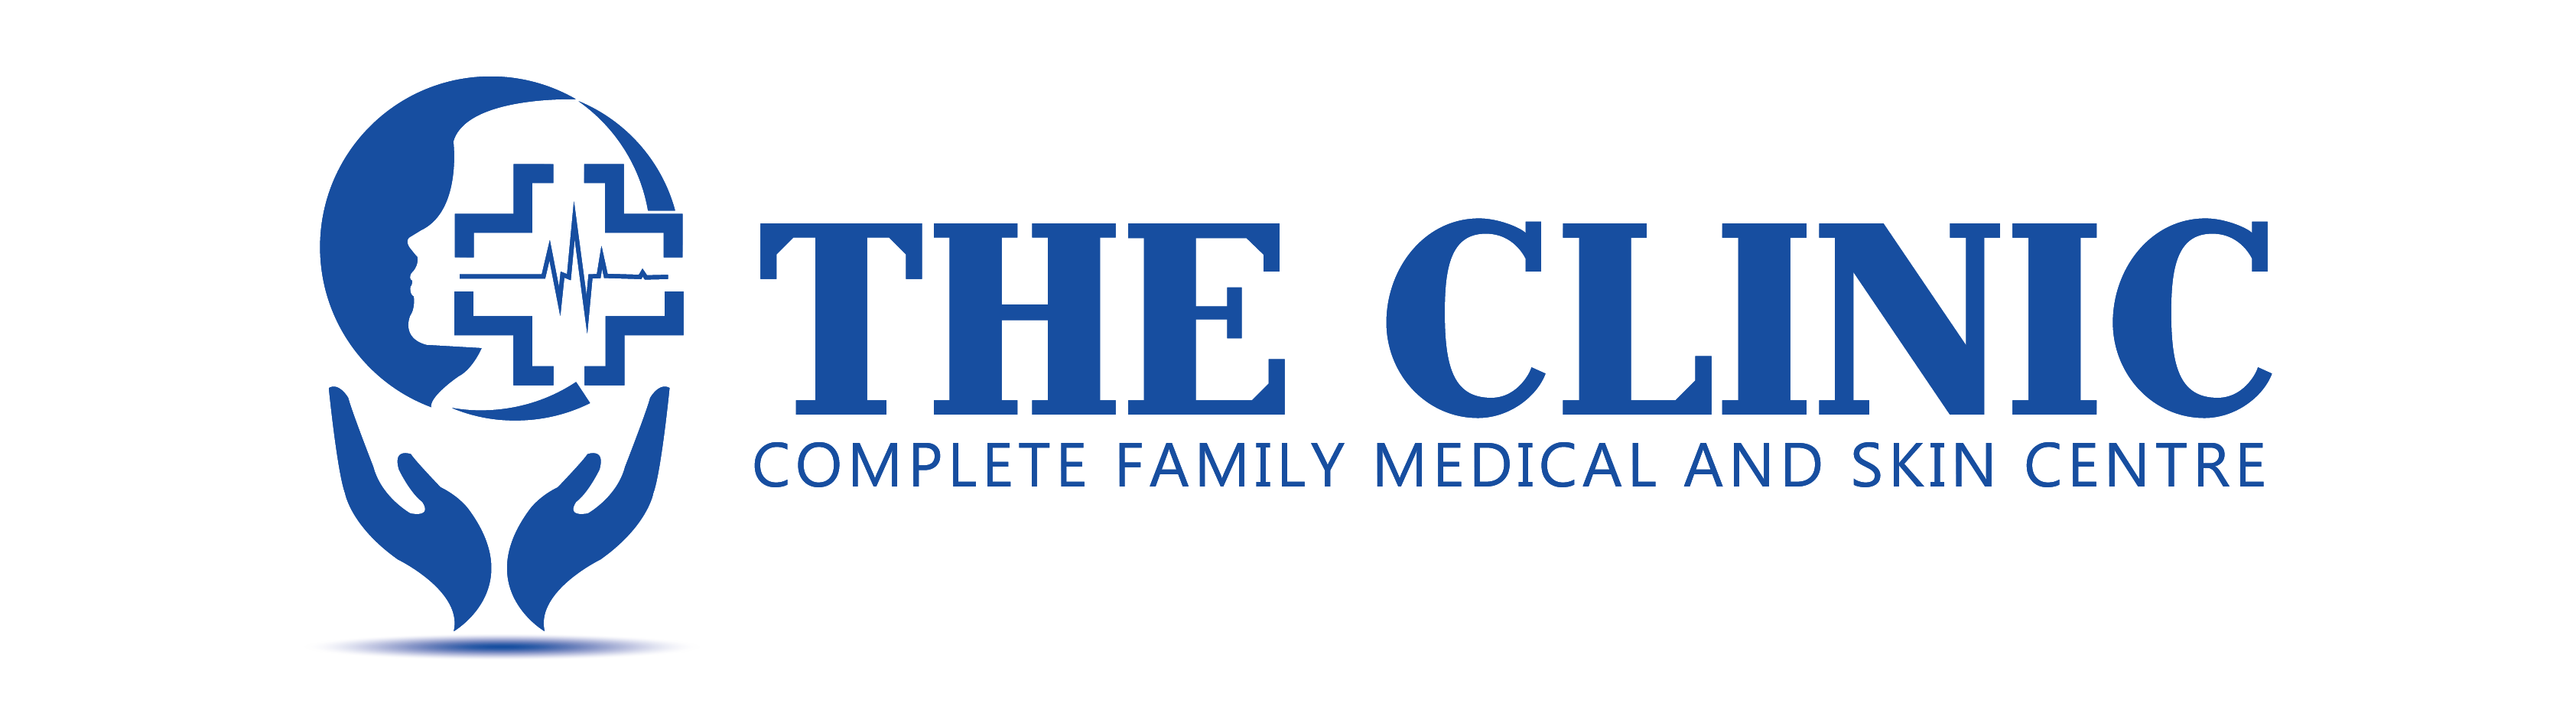 The Clinic Complete Family and Skin Centre